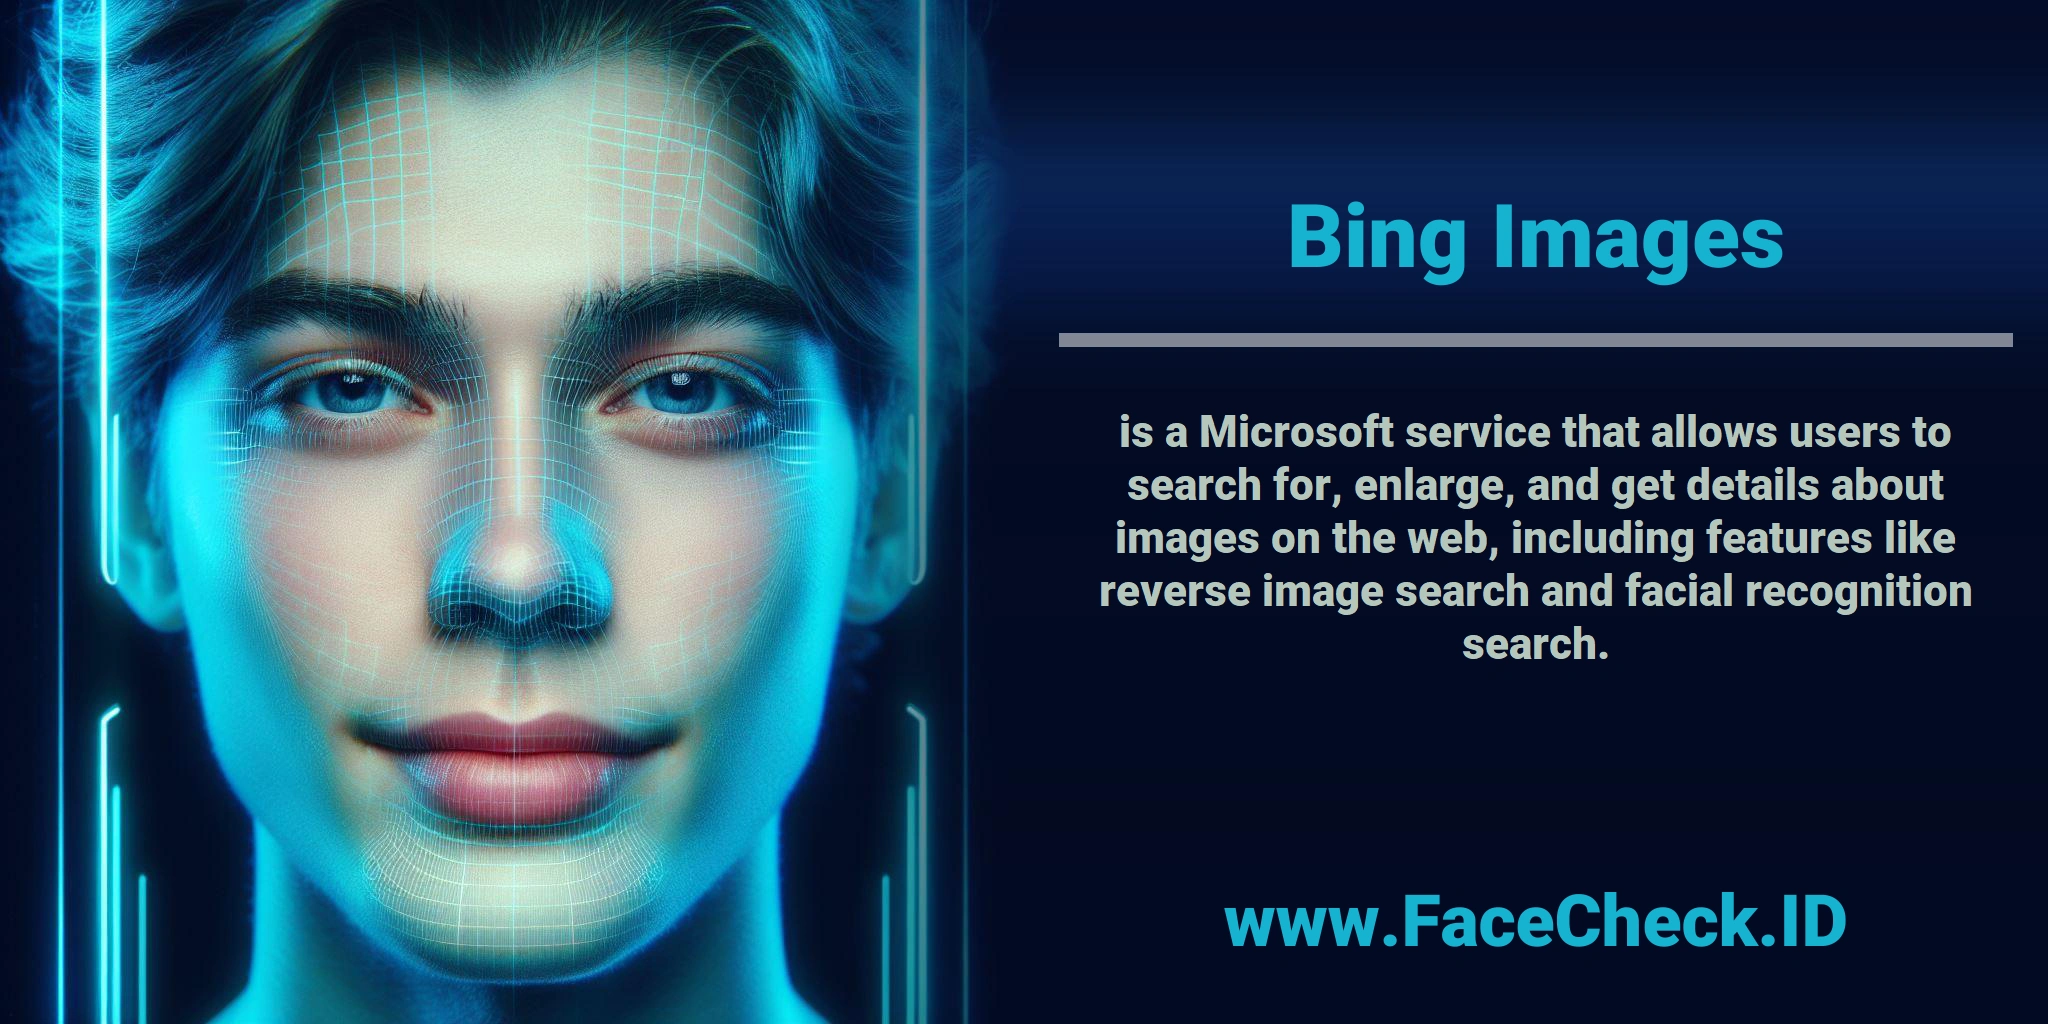 <b>Bing Images</b> is a Microsoft service that allows users to search for, enlarge, and get details about images on the web, including features like reverse image search and facial recognition search.